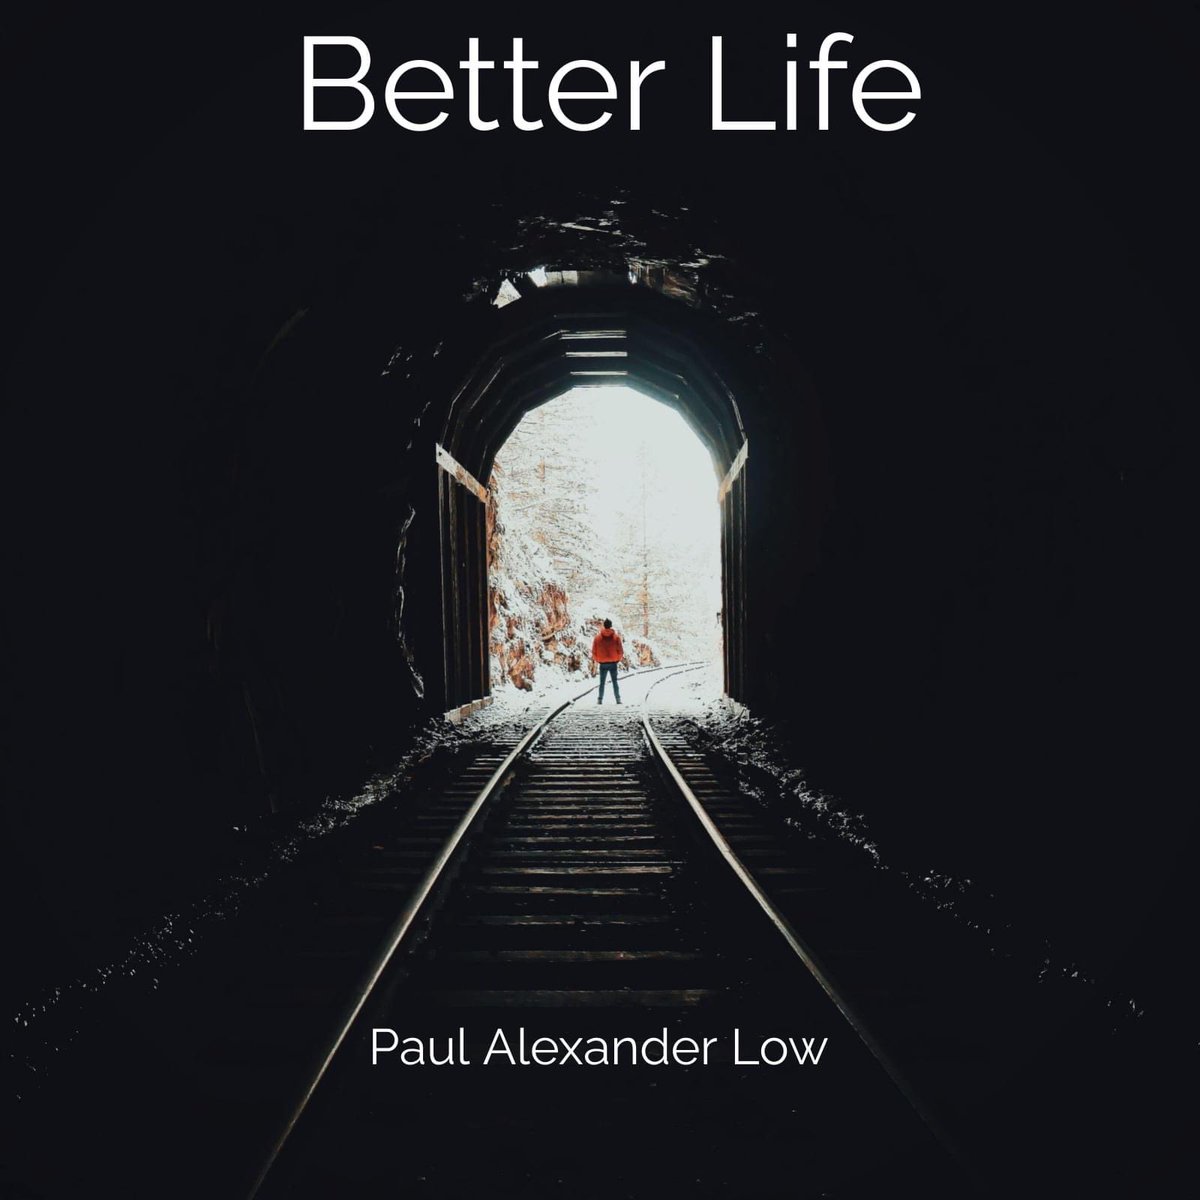 Paul Alexander Low - Better Life ‘Better Life’ from the album ‘Sunshine After The Rain’ by Paul Alexander Low is the latest singe to be released from the album and is available on all major digital platforms. paulalexanderlow.com